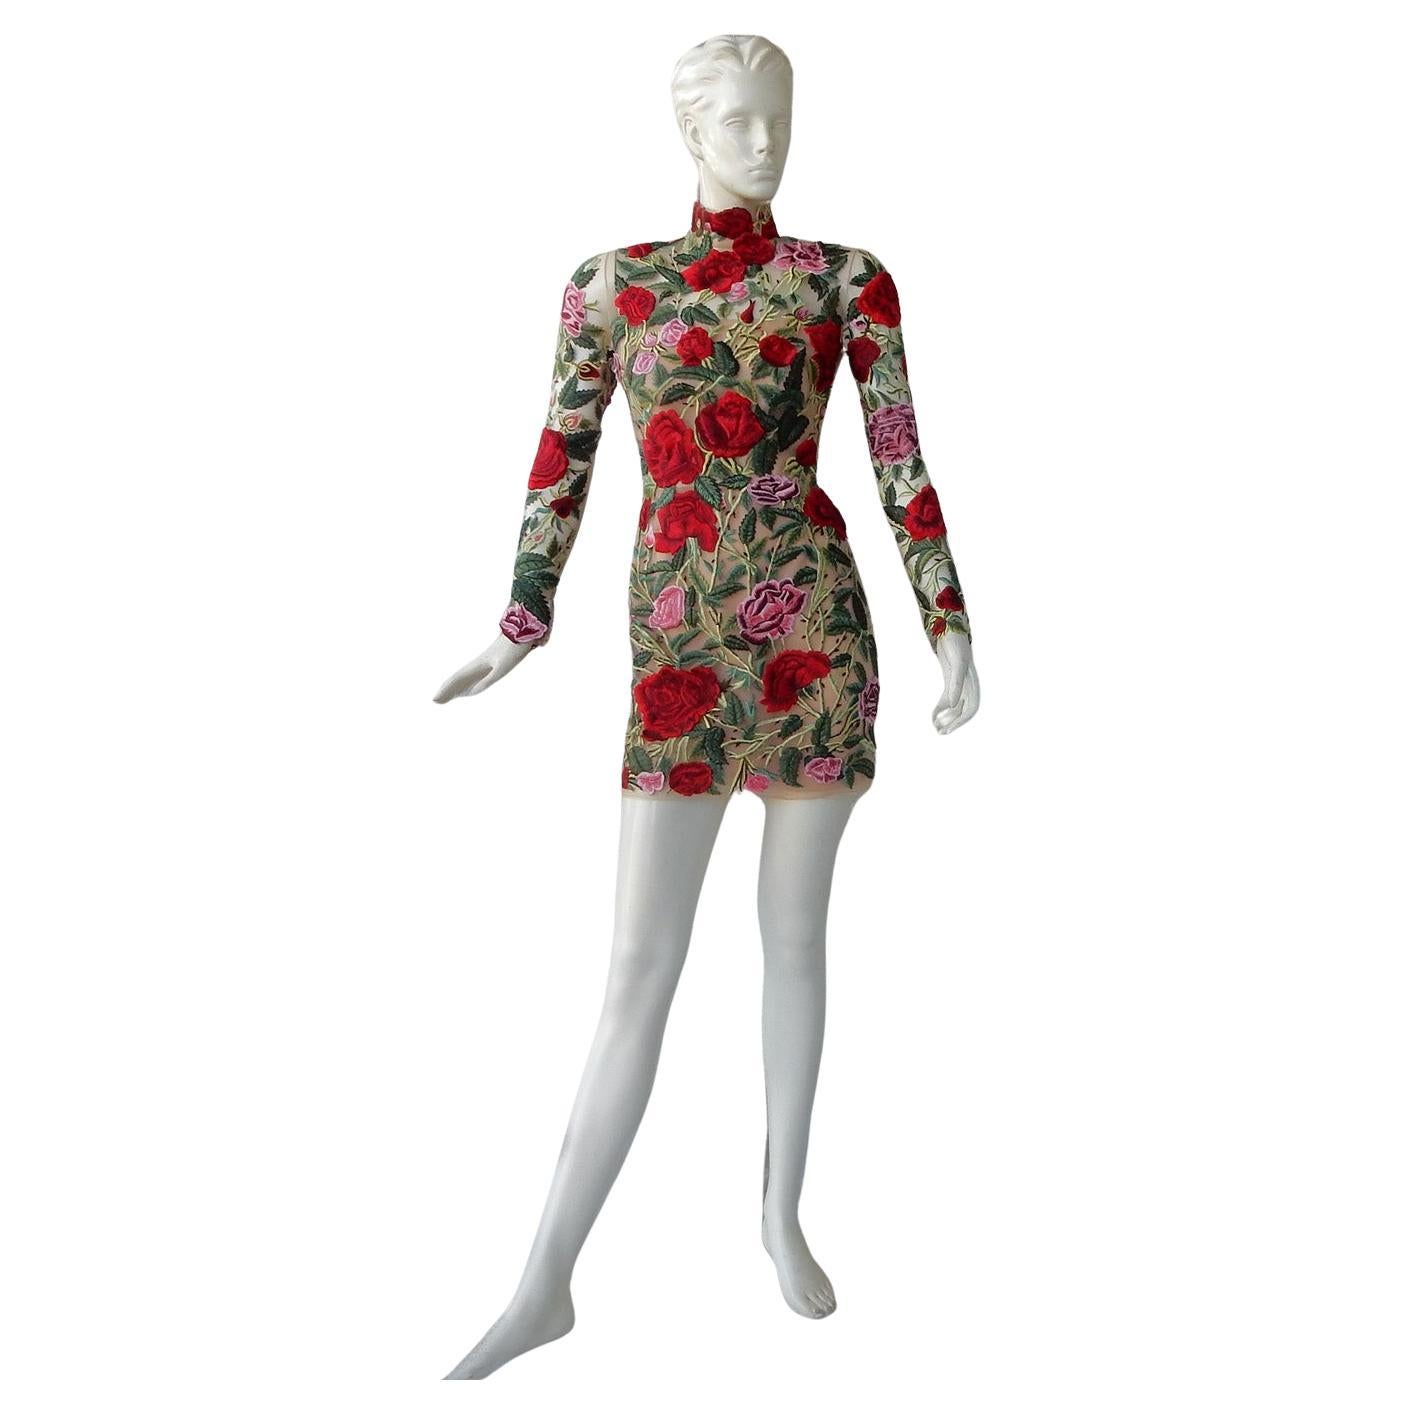 NWT Runway Oscar de la Renta Coveted Floral Embroidered Mini Dress For Sale